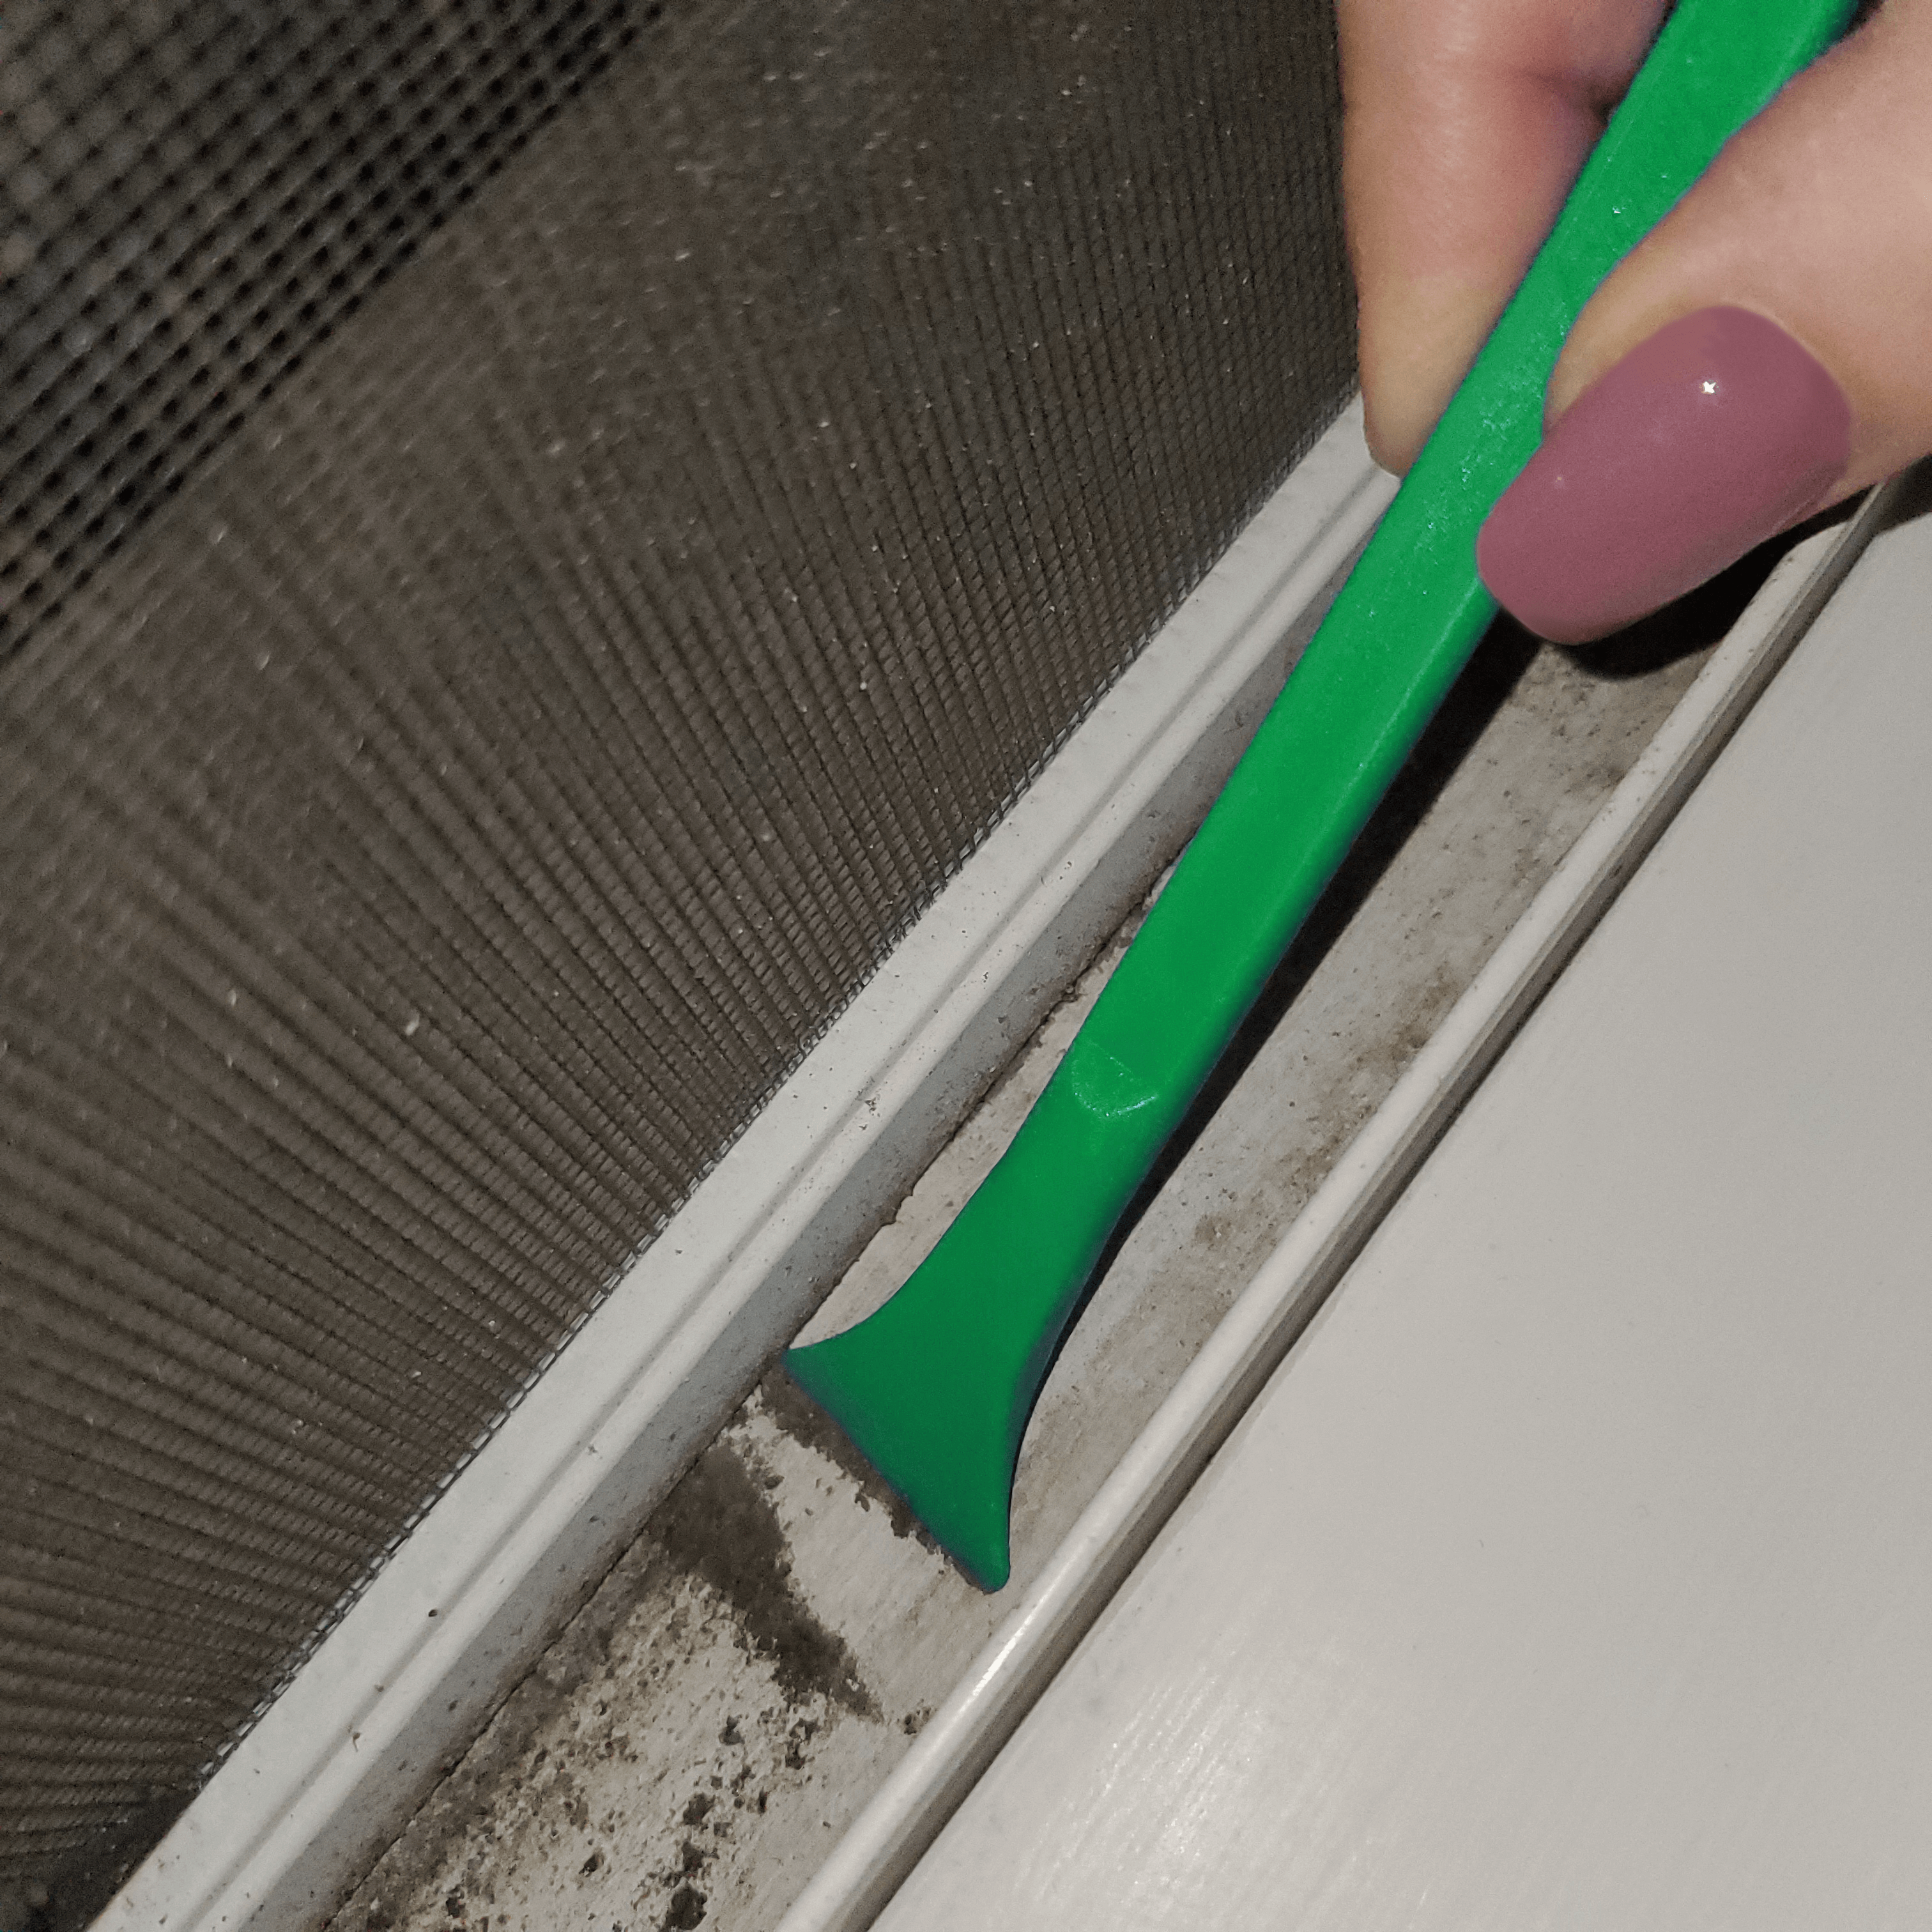 Cleaning widow sill with Wide Blade Scrigit